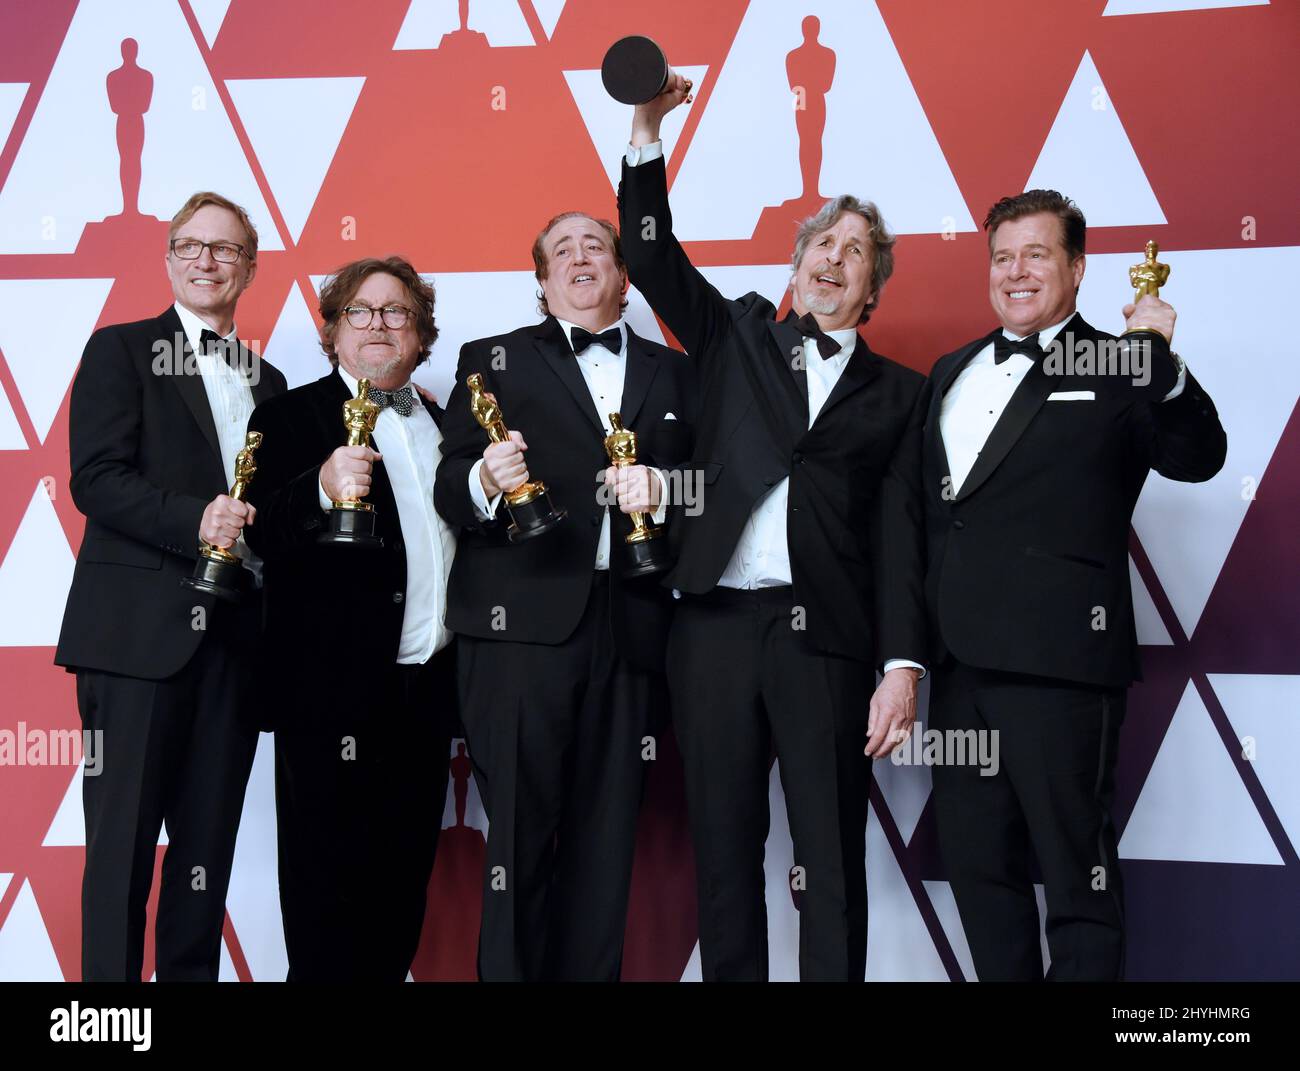 Jim Burke, Charles B. Wessler, Nick Vallelonga, Peter Farrelly, Brian Currie at the '91st Annual Academy Awards' - Press Room held at the Dolby Theatre Stock Photo